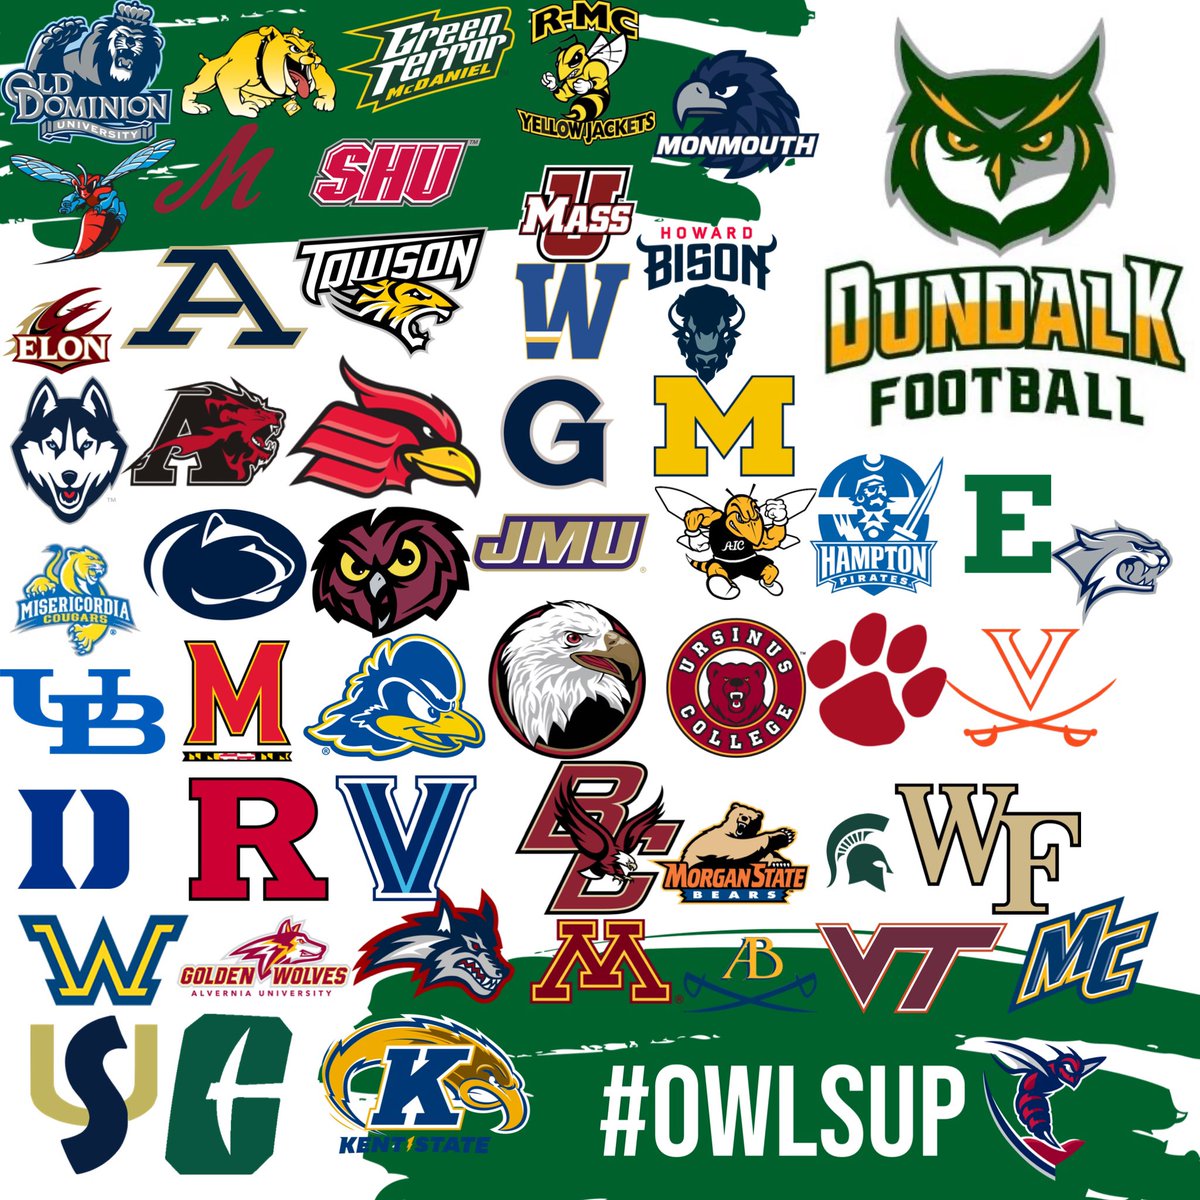 Thank you to all the Universities who stopped by the Nest this spring! Our student athletes are so appreciative! #OwlsUp🦉 #BeastsOfTheEast #RecruitBaltimore